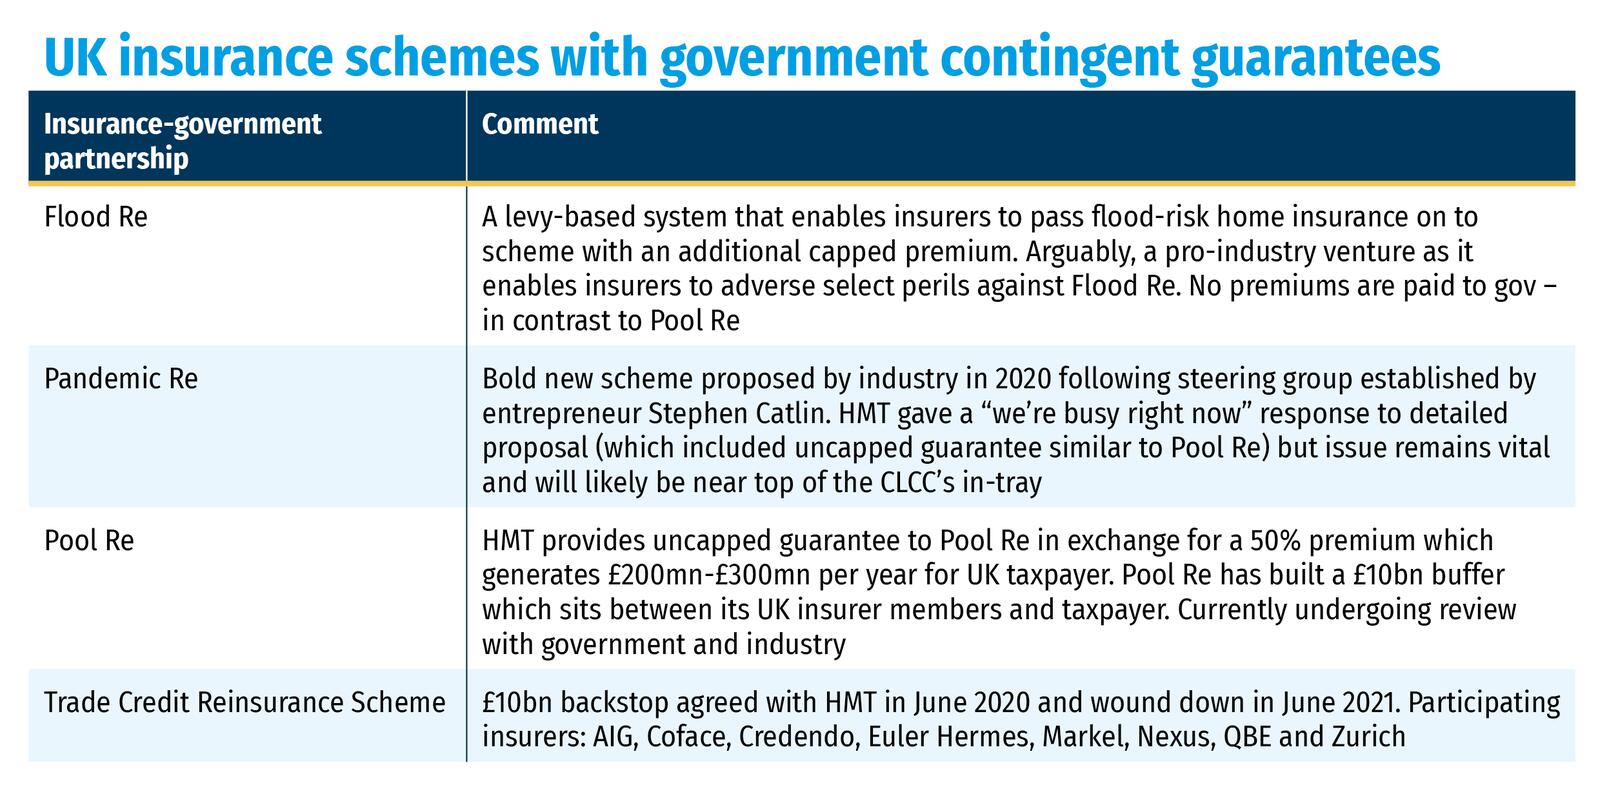 UK insurance schemes with government contingent guarantees